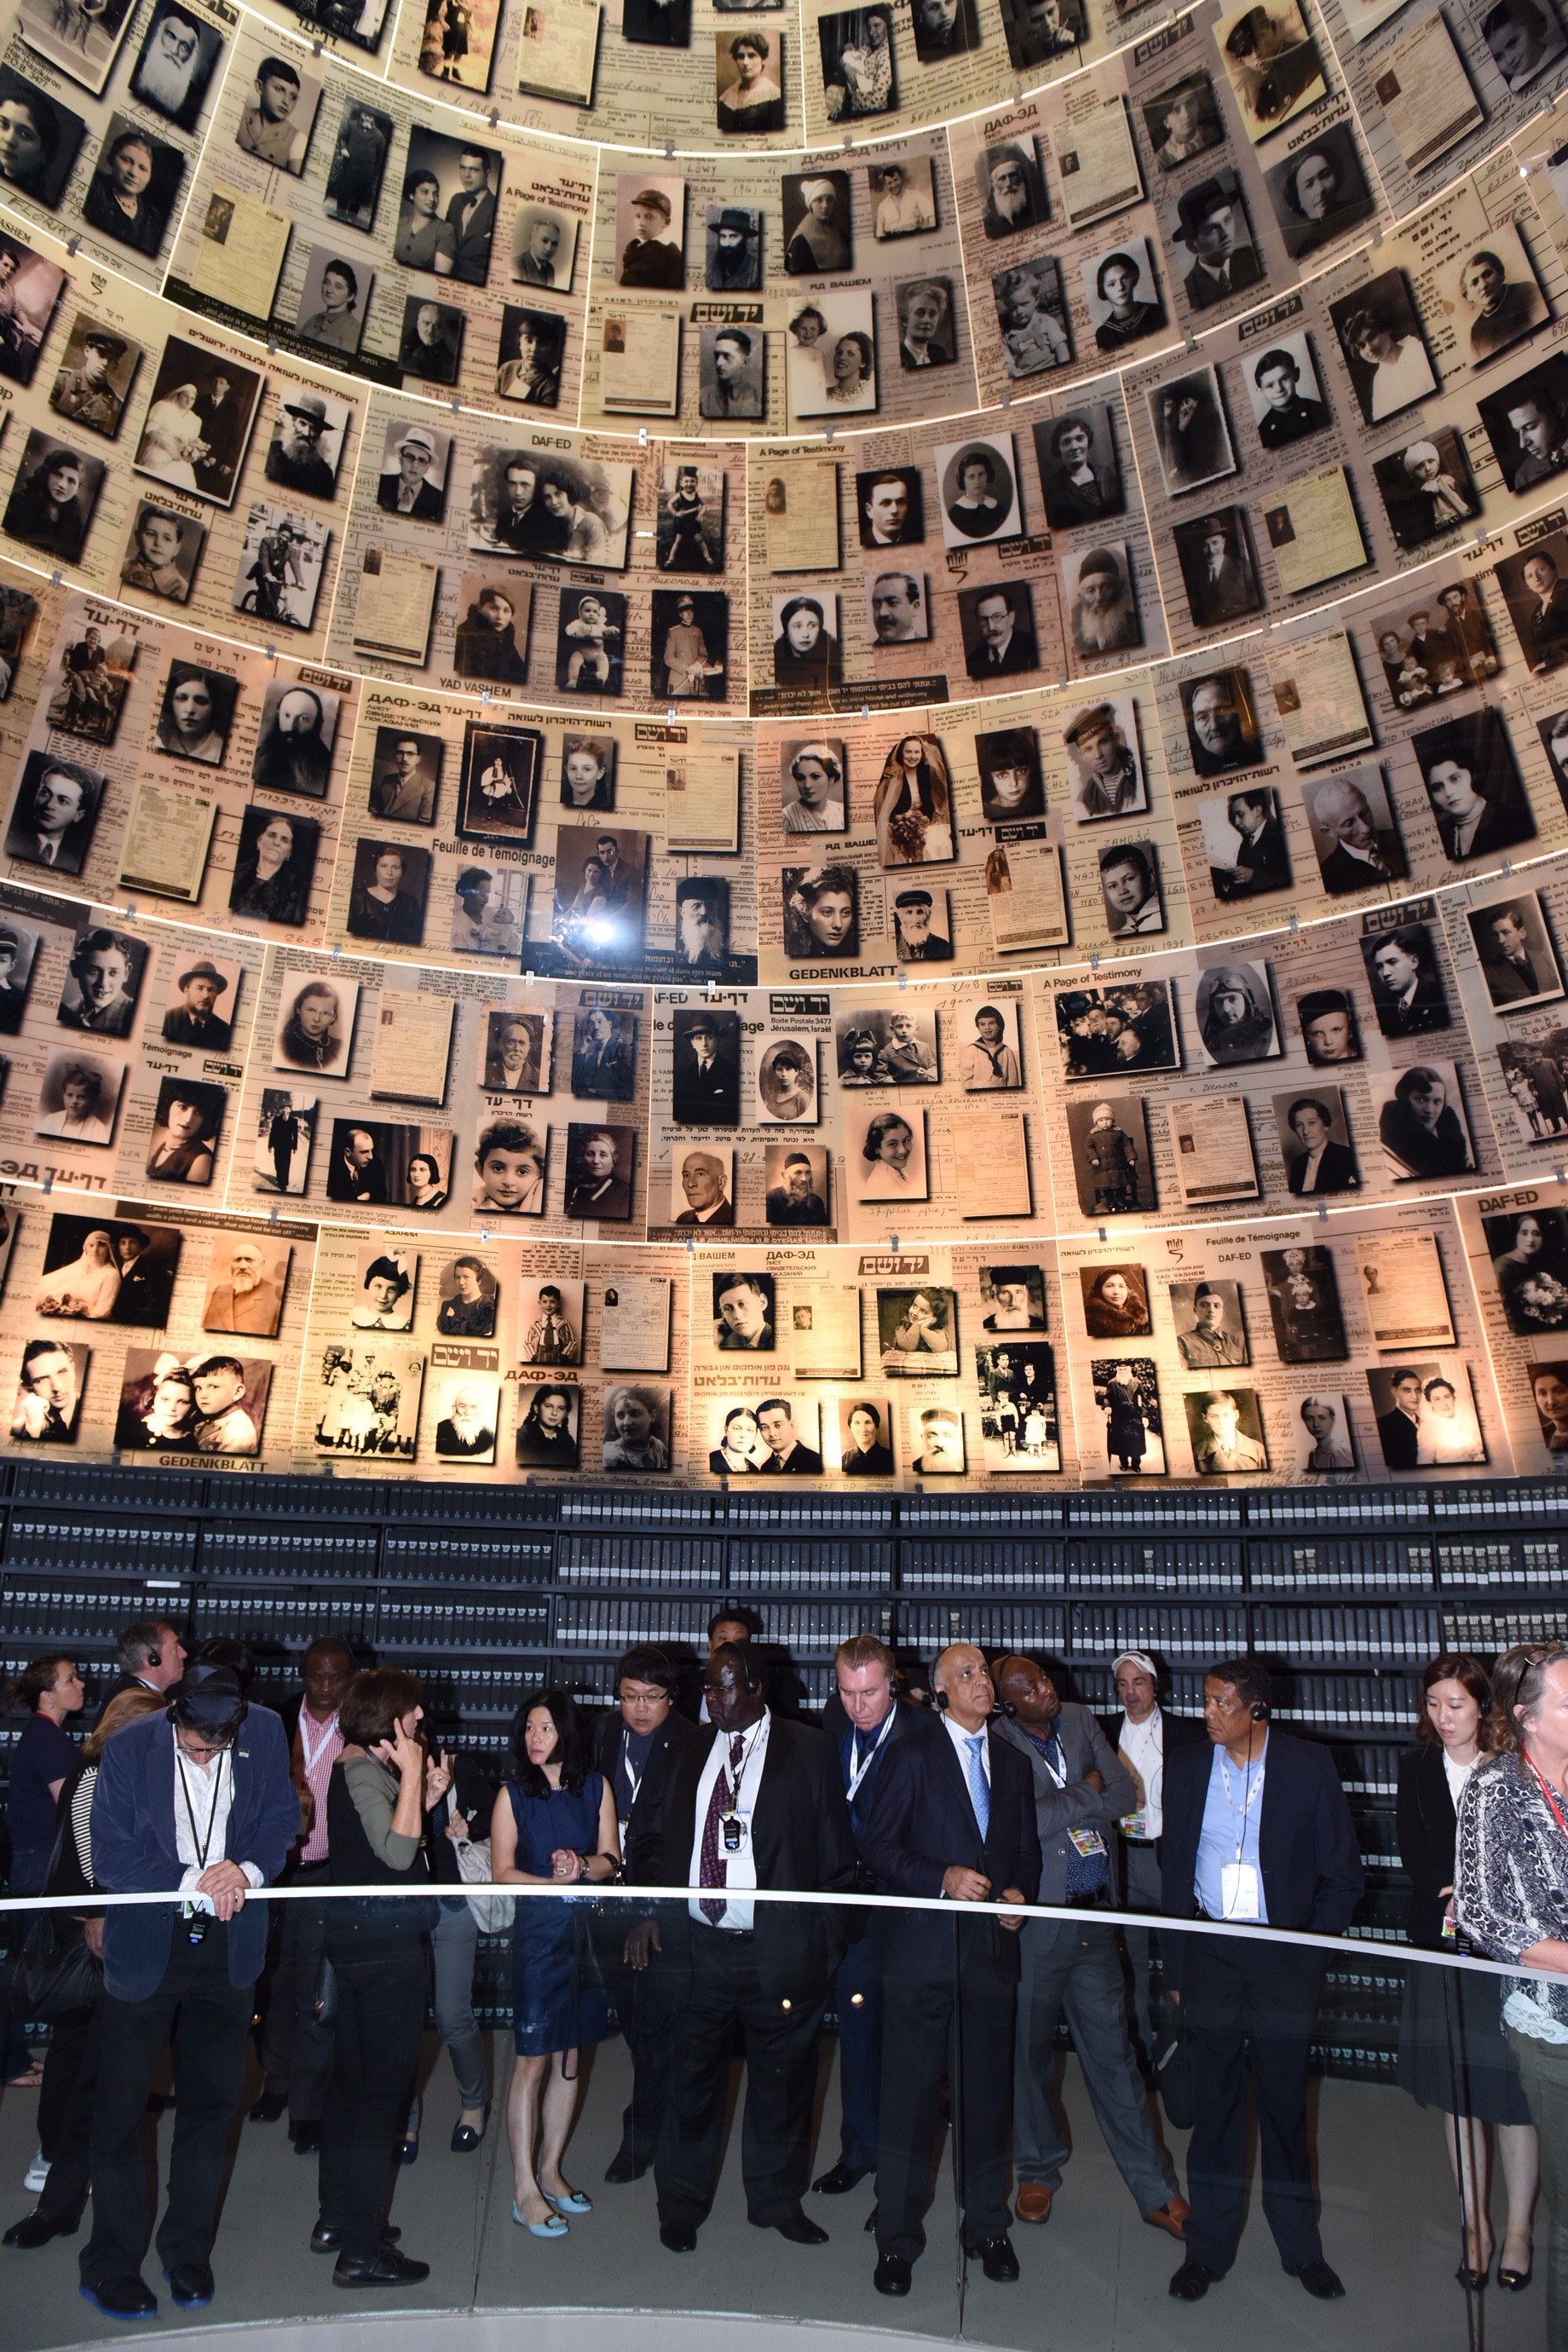 In the Hall of Names – dedicated to remembering each individual Holocaust victim